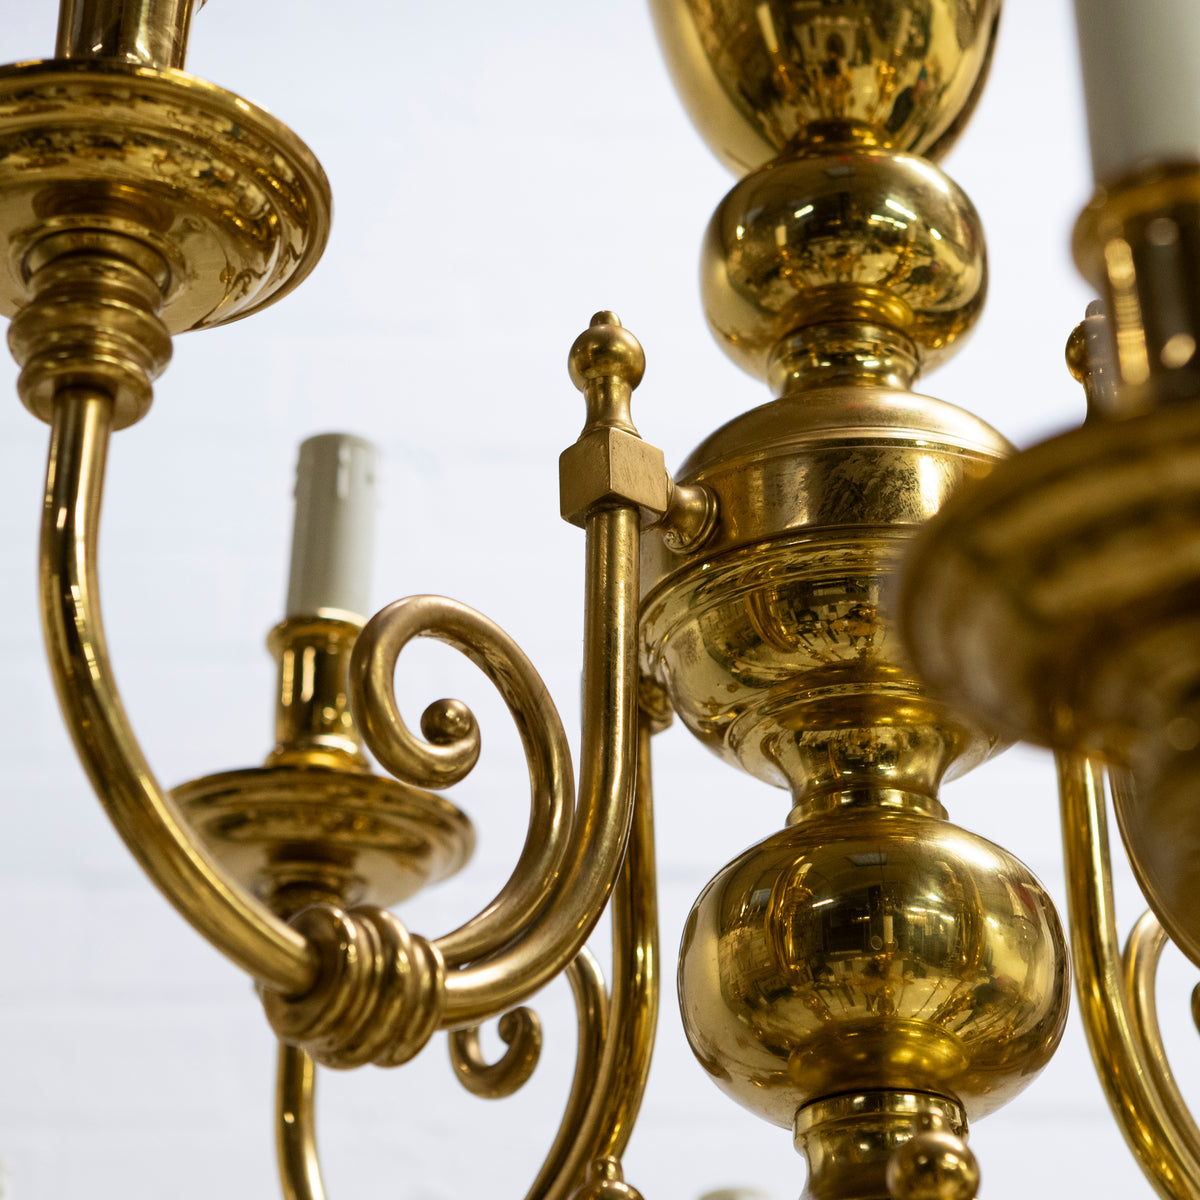 Magnificent Flemish Style 3 Tier Brass Chandelier | Clothworkers&#39; Hall London | The Architectural Forum